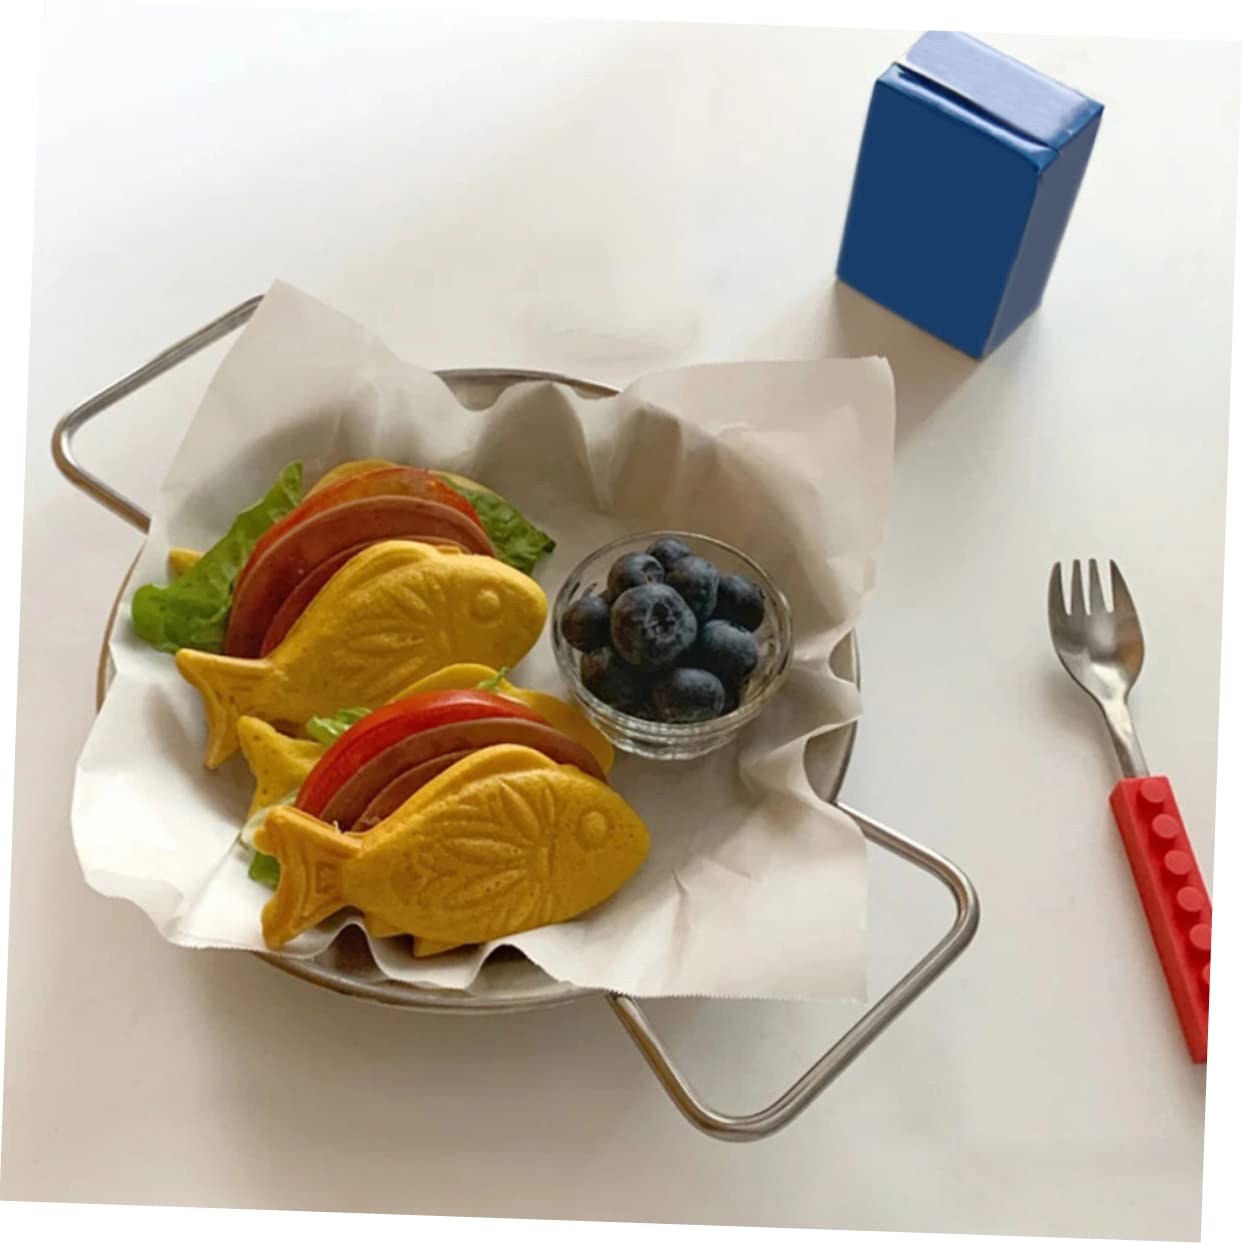 Mobestech 1pc Snack Stainless Dish Handles Cafeteria Serving Container Restaurant Double Home Steel with Fruit Camping Appetizer Party Dried Anti-scalding Tray Plates Food Dessert Cm Picnic